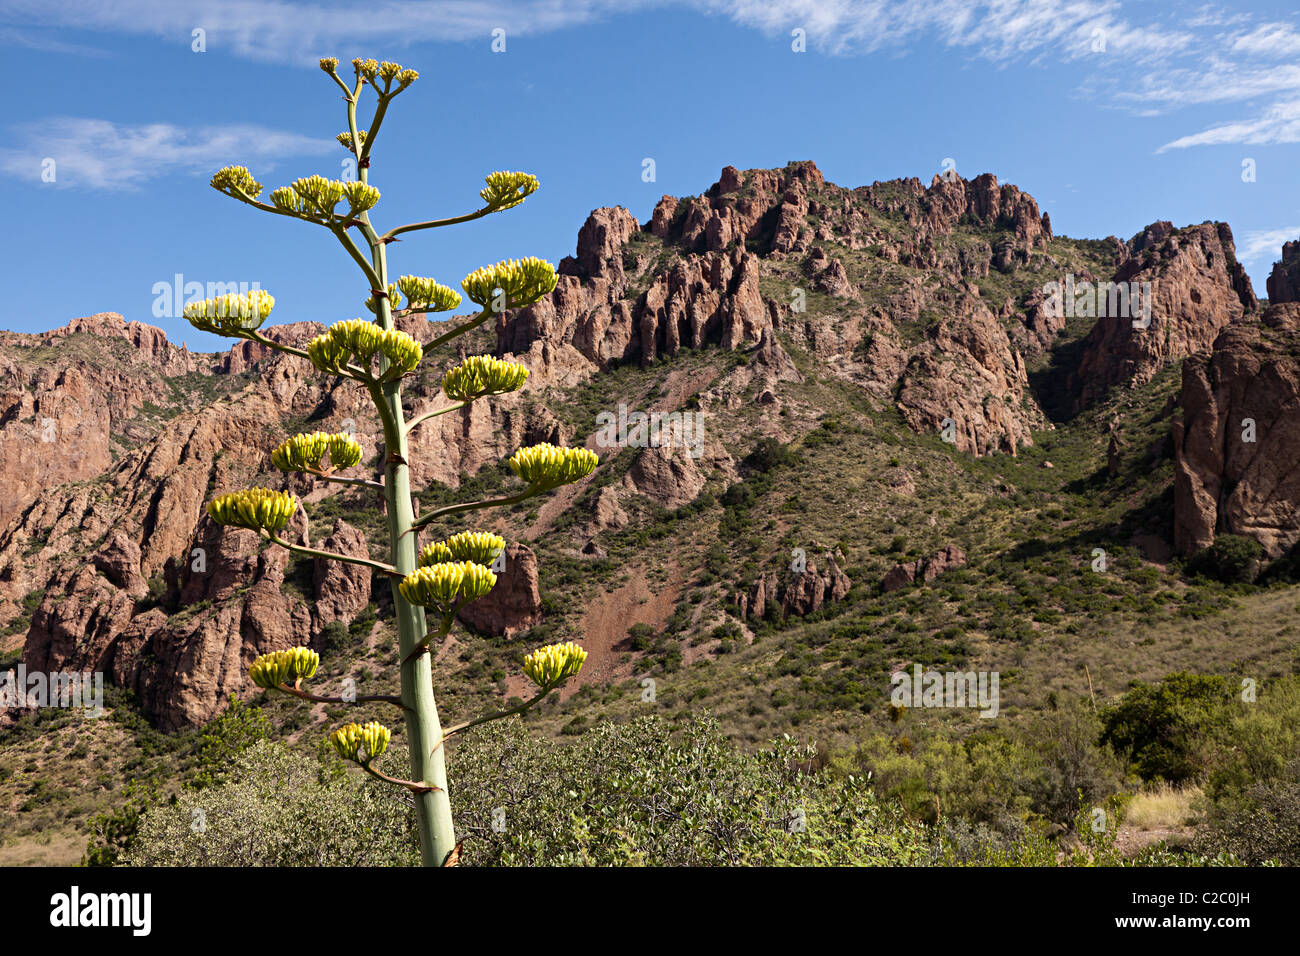 Century plant Agave americana in flower Big Bend National Park Texas USA Stock Photo